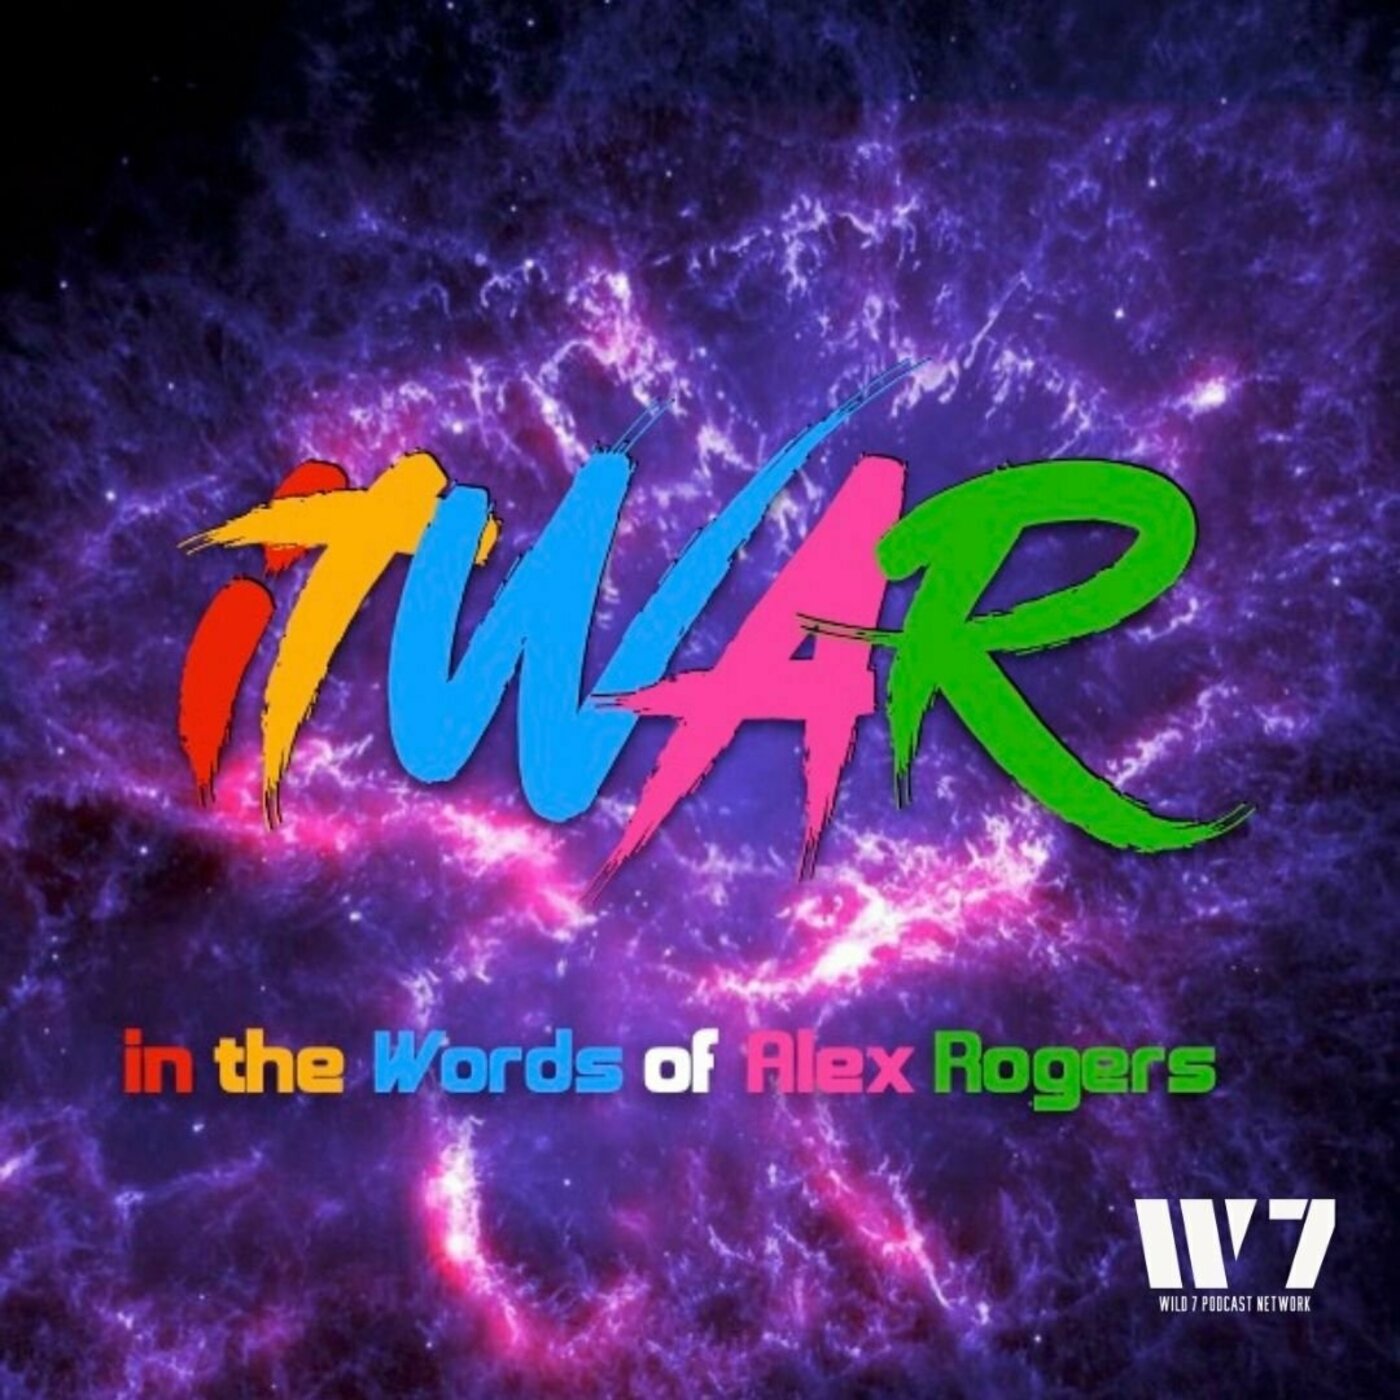 ITWAR - Episode 47: YOU'LL BE DEAD! - In the Words of Alex Rogers